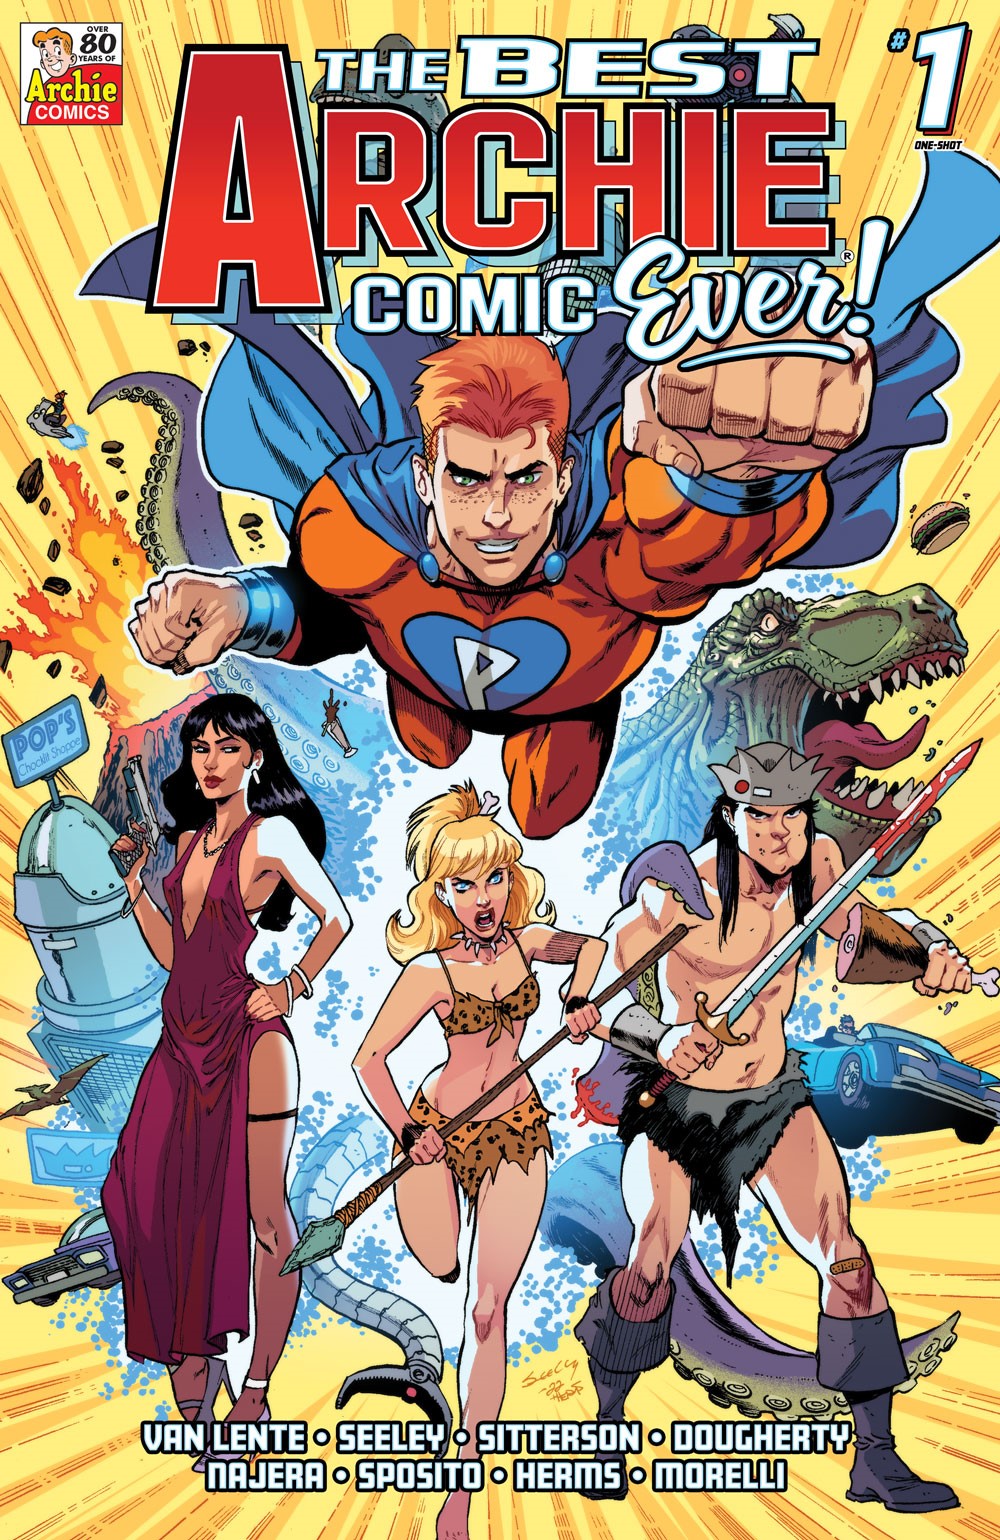 Best Archie Comic Ever from Archie Comics